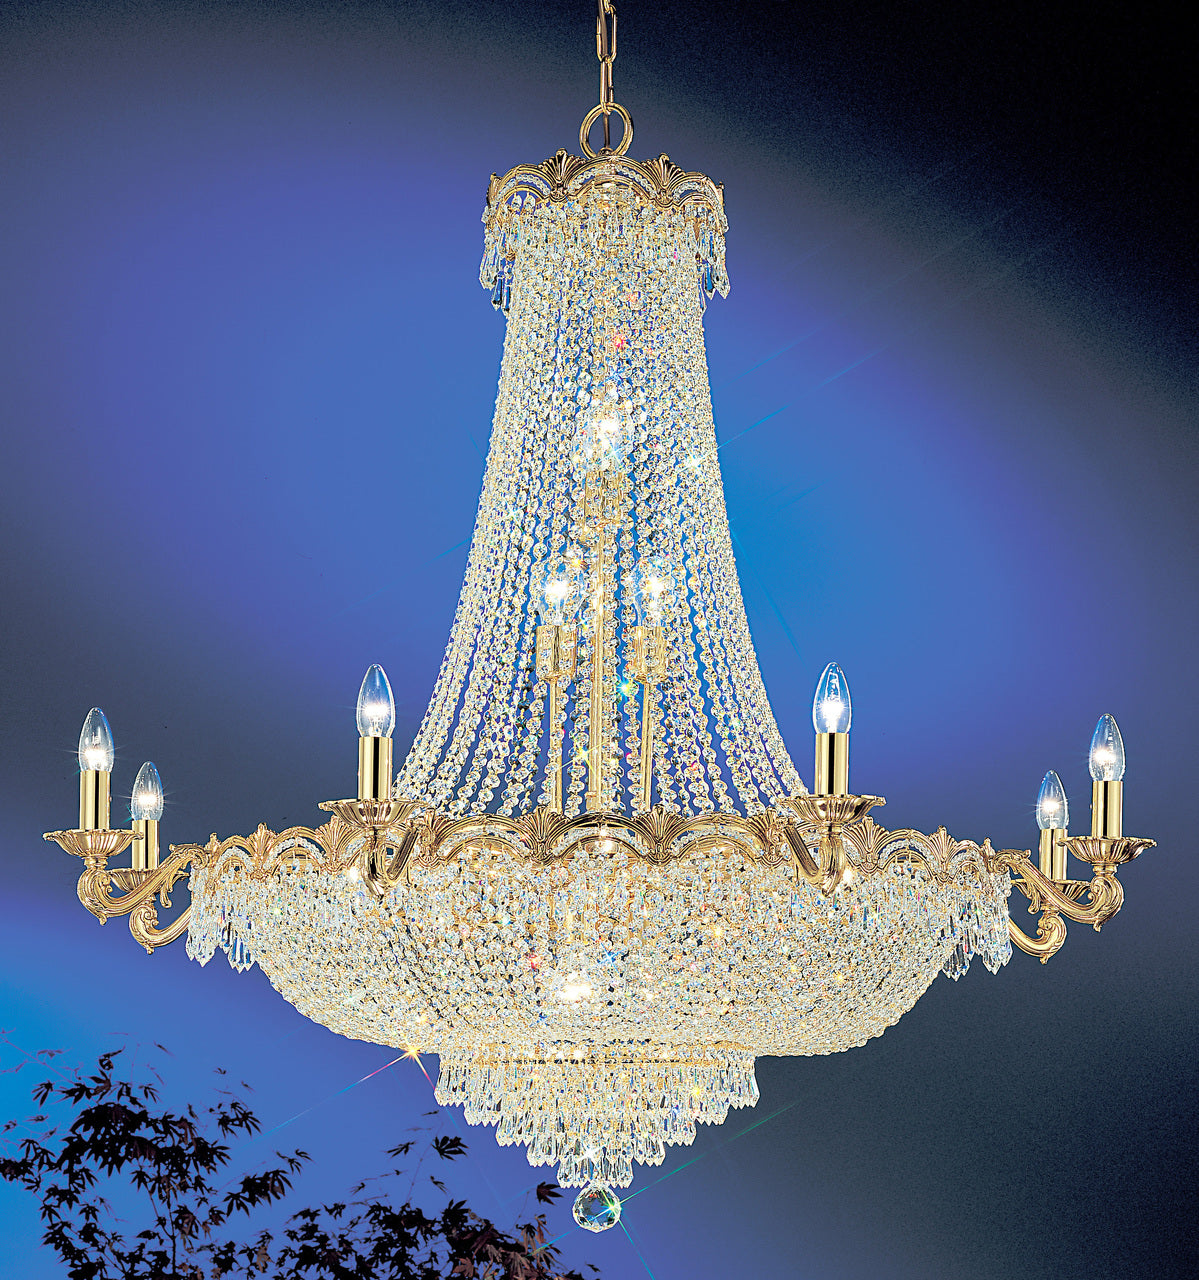 Classic Lighting 1860 G CP Regency II Crystal Chandelier in 24k Gold (Imported from Spain)